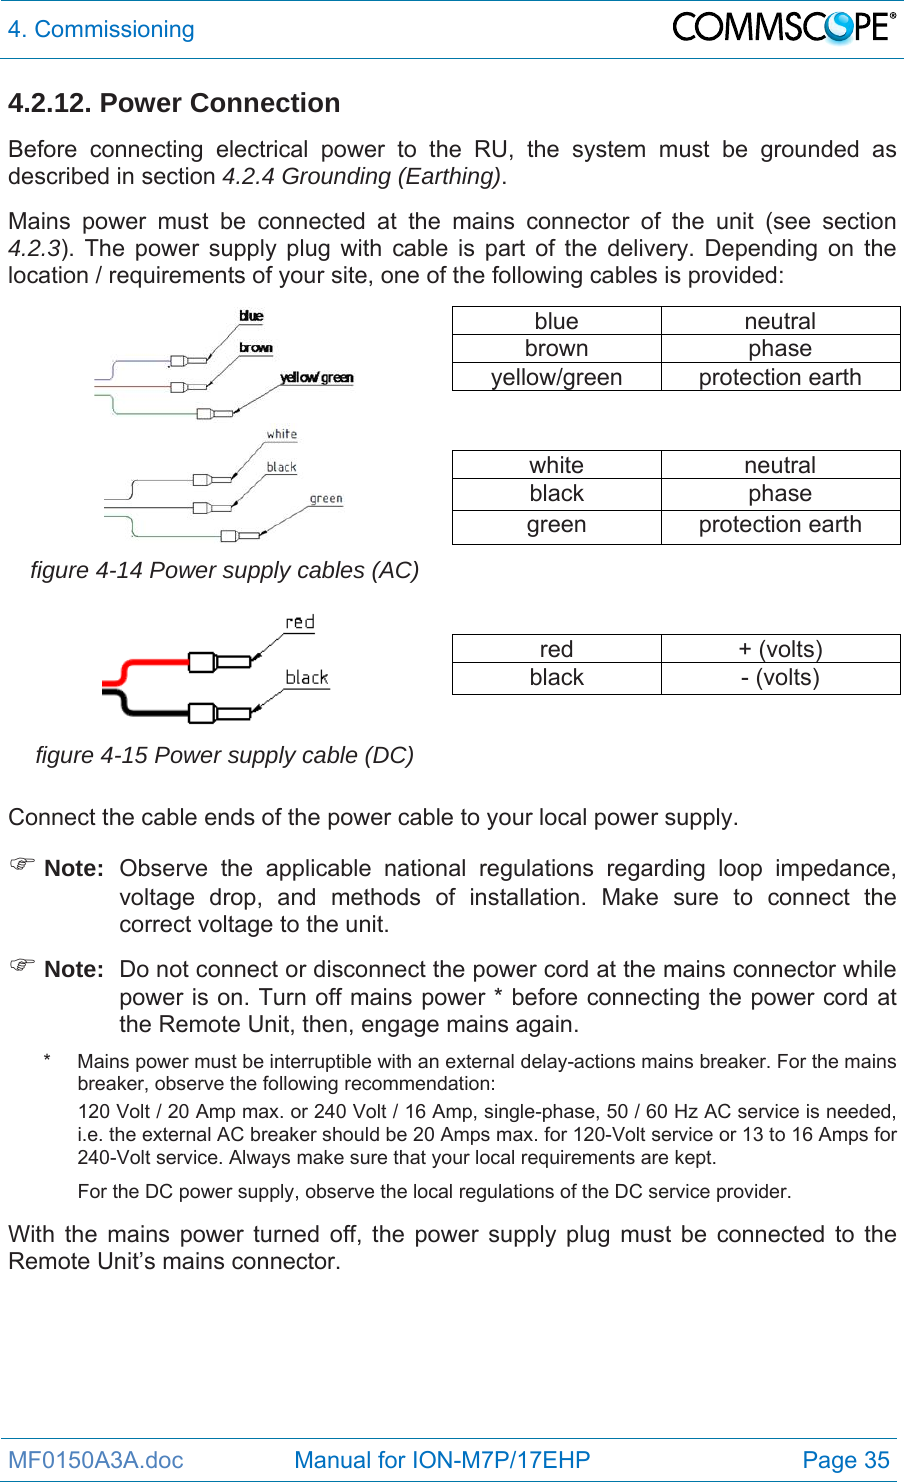 4. Commissioning  MF0150A3A.doc                 Manual for ION-M7P/17EHP  Page 35 4.2.12. Power Connection Before connecting electrical power to the RU, the system must be grounded as described in section 4.2.4 Grounding (Earthing).  Mains power must be connected at the mains connector of the unit (see section 4.2.3). The power supply plug with cable is part of the delivery. Depending on the location / requirements of your site, one of the following cables is provided: blue neutral brown phase yellow/green protection earth     white neutral black phase green protection earth figure 4-14 Power supply cables (AC)      red + (volts) black - (volts)   figure 4-15 Power supply cable (DC)    Connect the cable ends of the power cable to your local power supply.  Note:  Observe the applicable national regulations regarding loop impedance, voltage drop, and methods of installation. Make sure to connect the correct voltage to the unit.  Note:  Do not connect or disconnect the power cord at the mains connector while power is on. Turn off mains power * before connecting the power cord at the Remote Unit, then, engage mains again. *   Mains power must be interruptible with an external delay-actions mains breaker. For the mains breaker, observe the following recommendation: 120 Volt / 20 Amp max. or 240 Volt / 16 Amp, single-phase, 50 / 60 Hz AC service is needed, i.e. the external AC breaker should be 20 Amps max. for 120-Volt service or 13 to 16 Amps for 240-Volt service. Always make sure that your local requirements are kept. For the DC power supply, observe the local regulations of the DC service provider. With the mains power turned off, the power supply plug must be connected to the Remote Unit’s mains connector.   